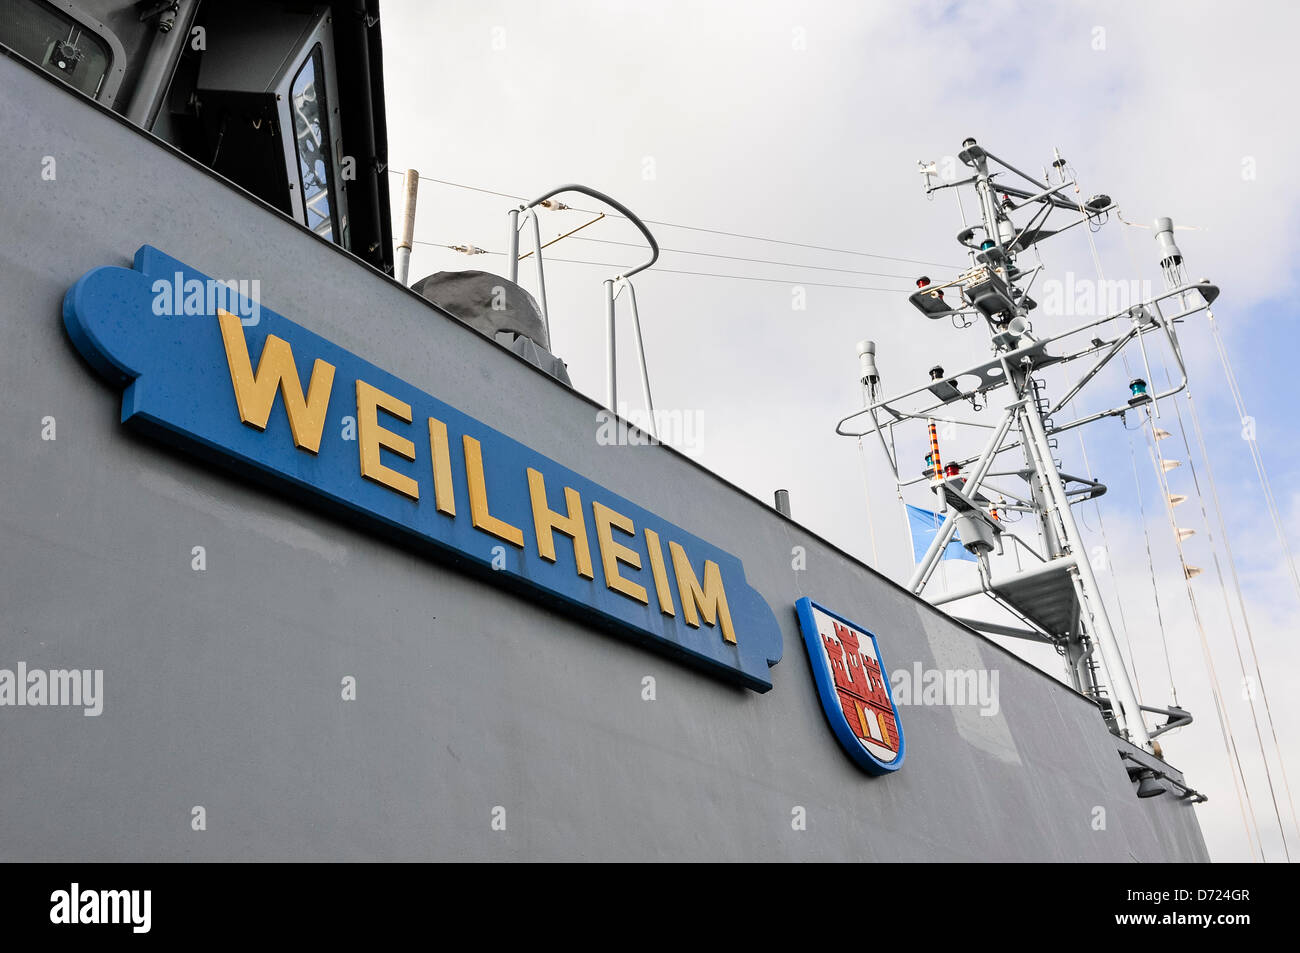 26th April 2013, Belfast, Northern Ireland. FGS Weilheim from the German Navy, one of the vessels of the Standing NATO Mine Countermeasures Group 1 (SNMCG1) Stock Photo